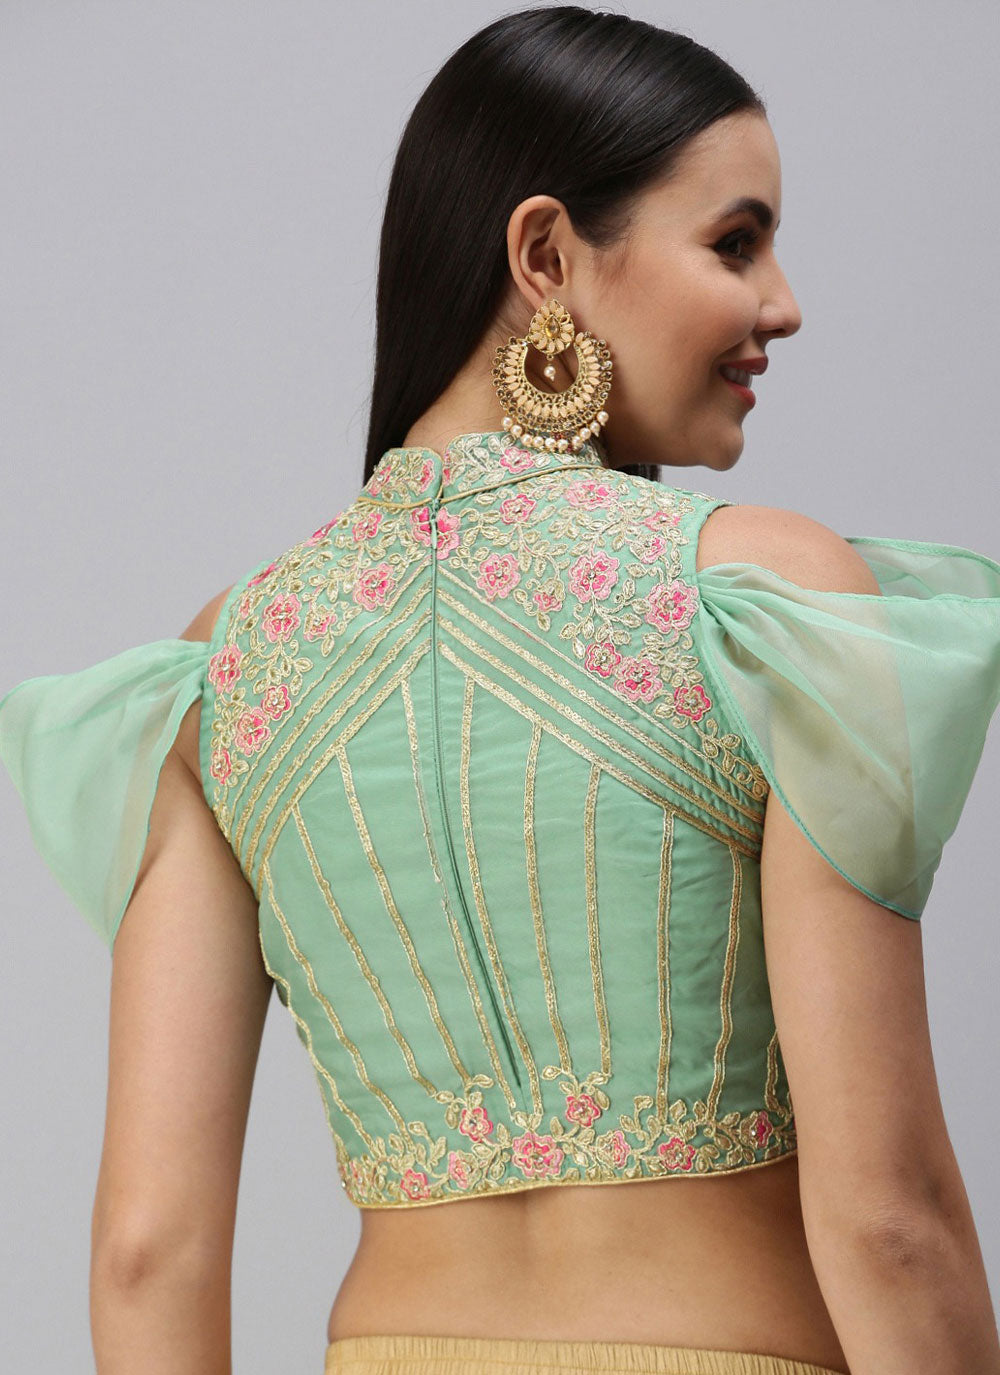 Embroidered Turquoise Blouse For Festival